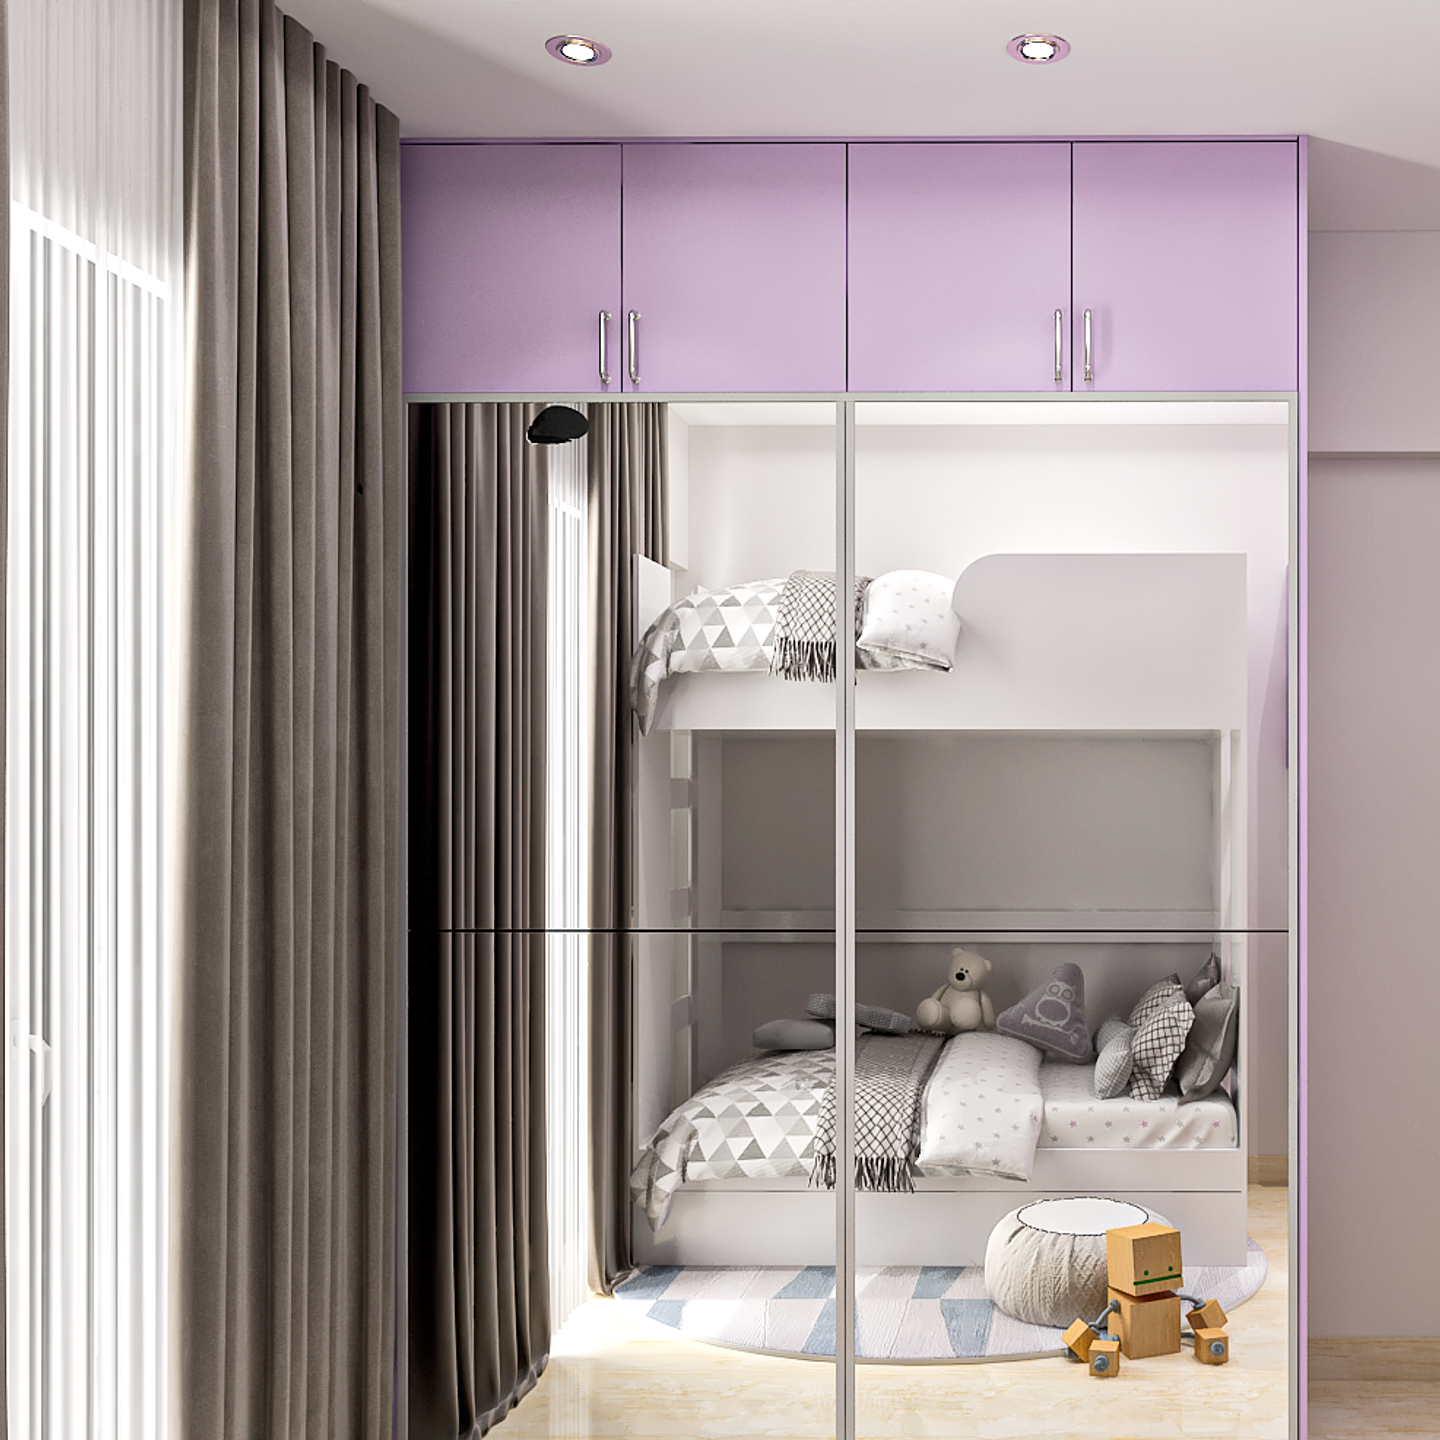 Contemporary Kid's Room Design For Girls With Purple Study Table